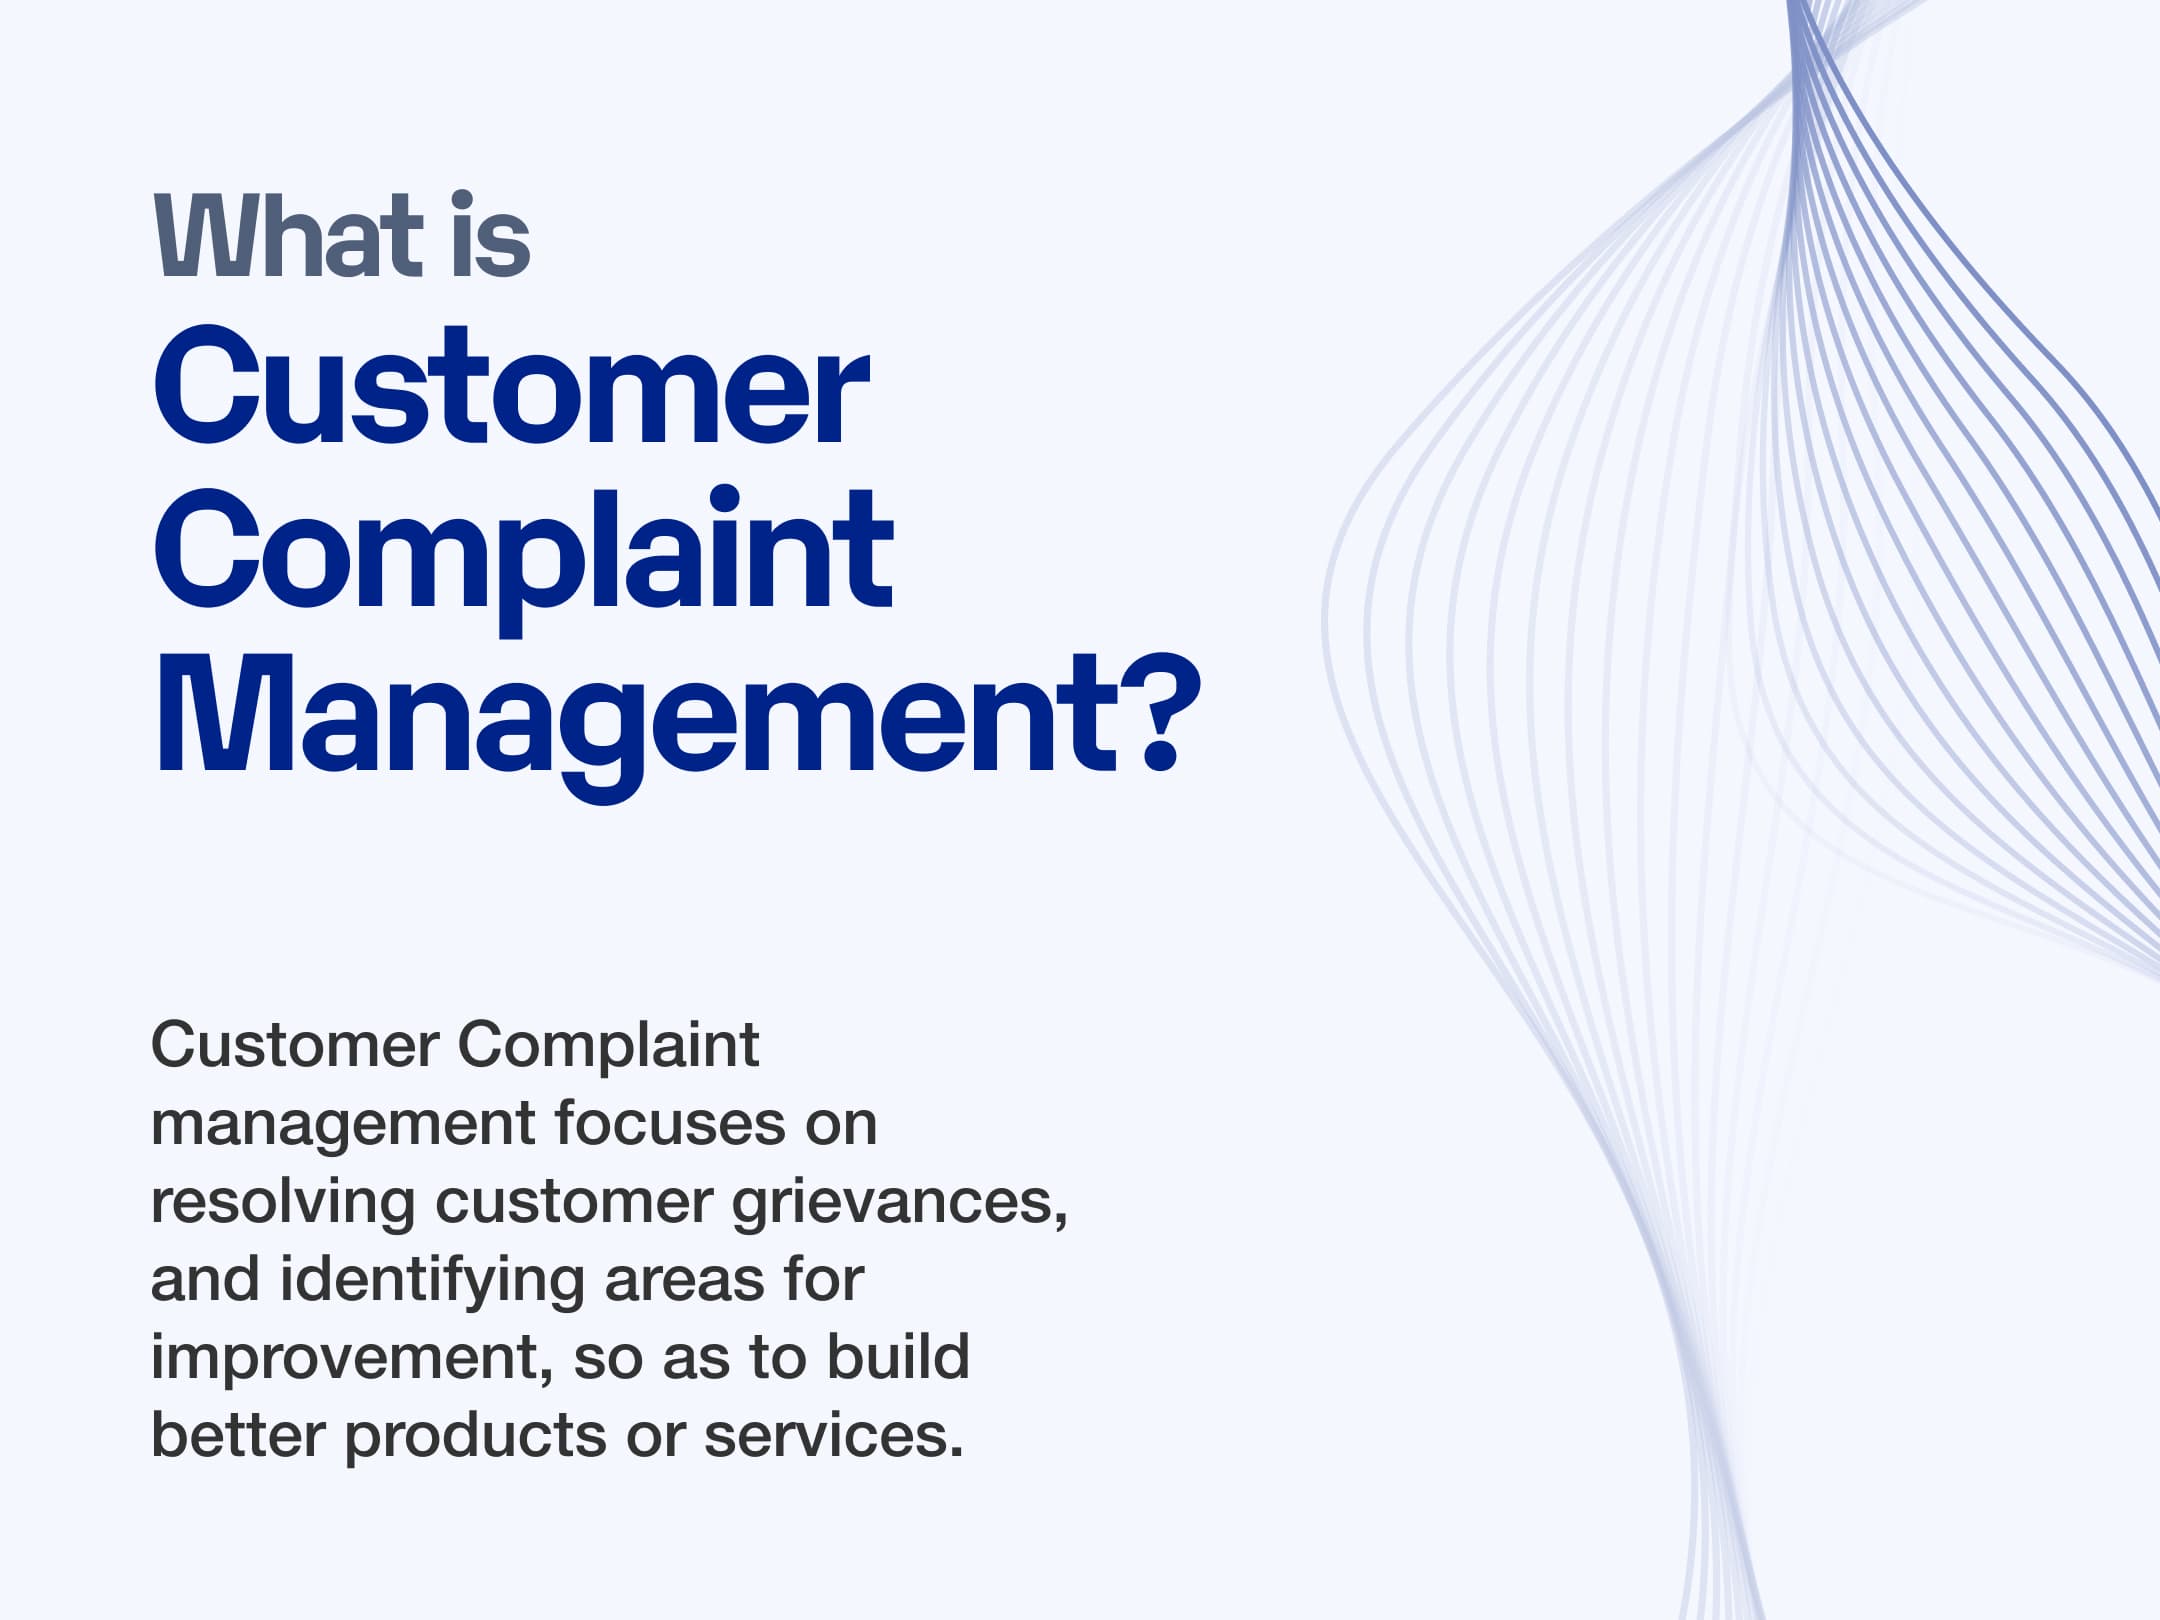 What is Customer Compliant Management